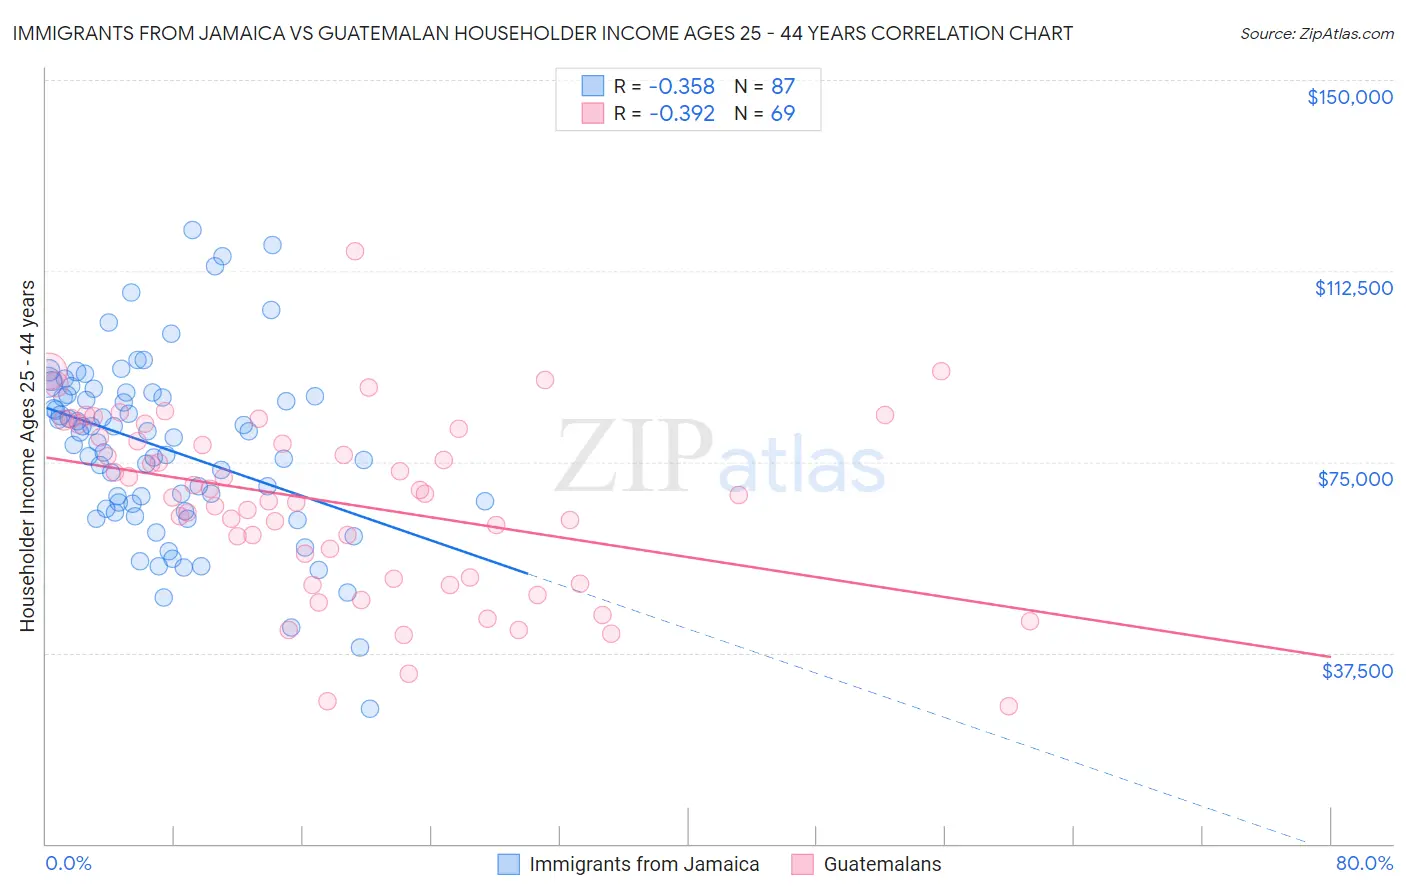 Immigrants from Jamaica vs Guatemalan Householder Income Ages 25 - 44 years